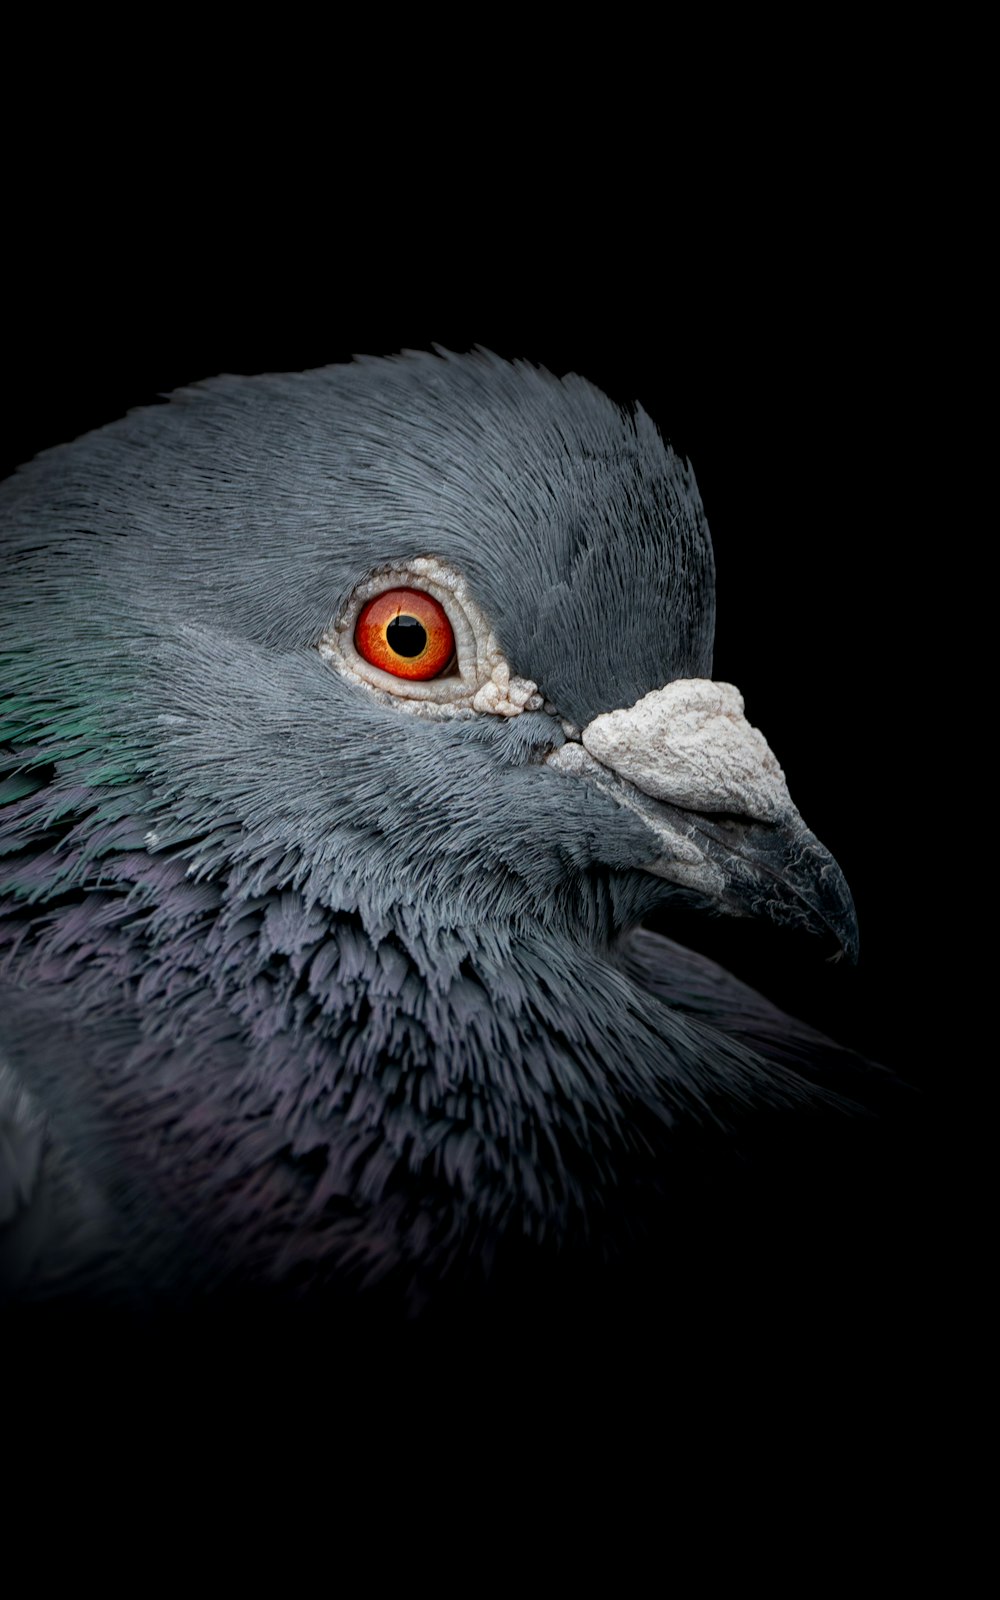 a close up of a pigeon on a black background